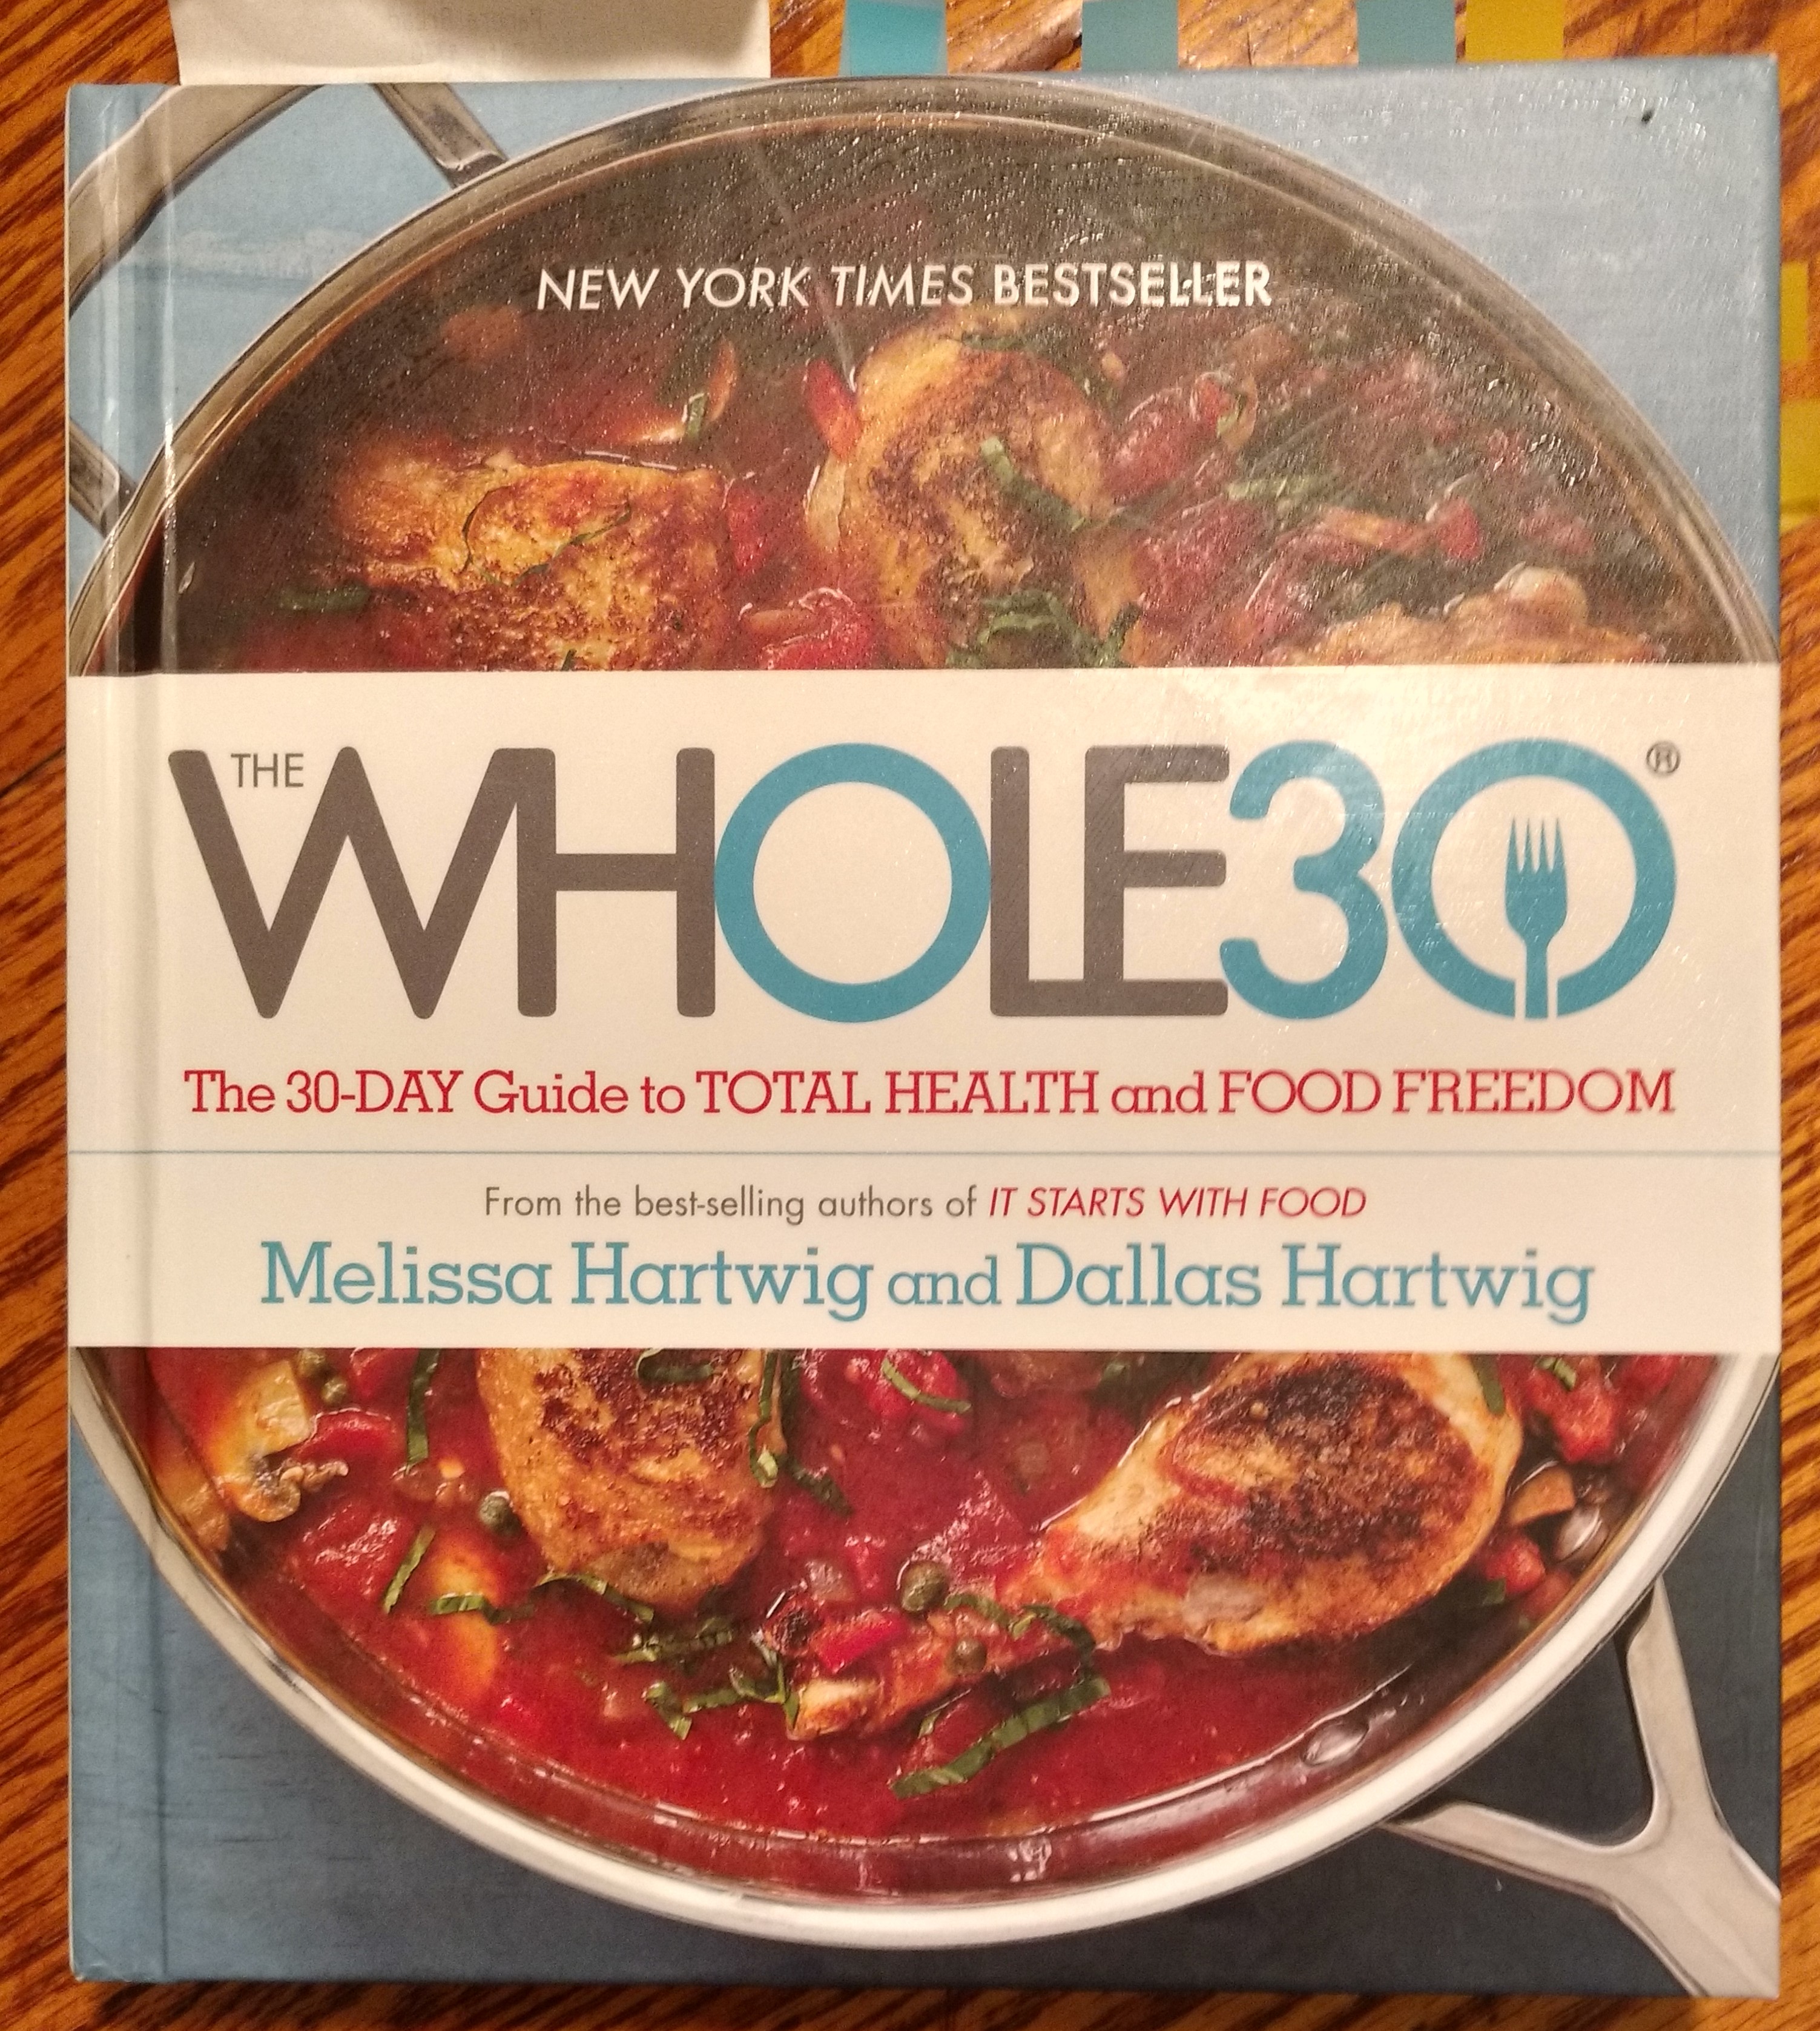 What Happens After a Few Weeks on Whole30